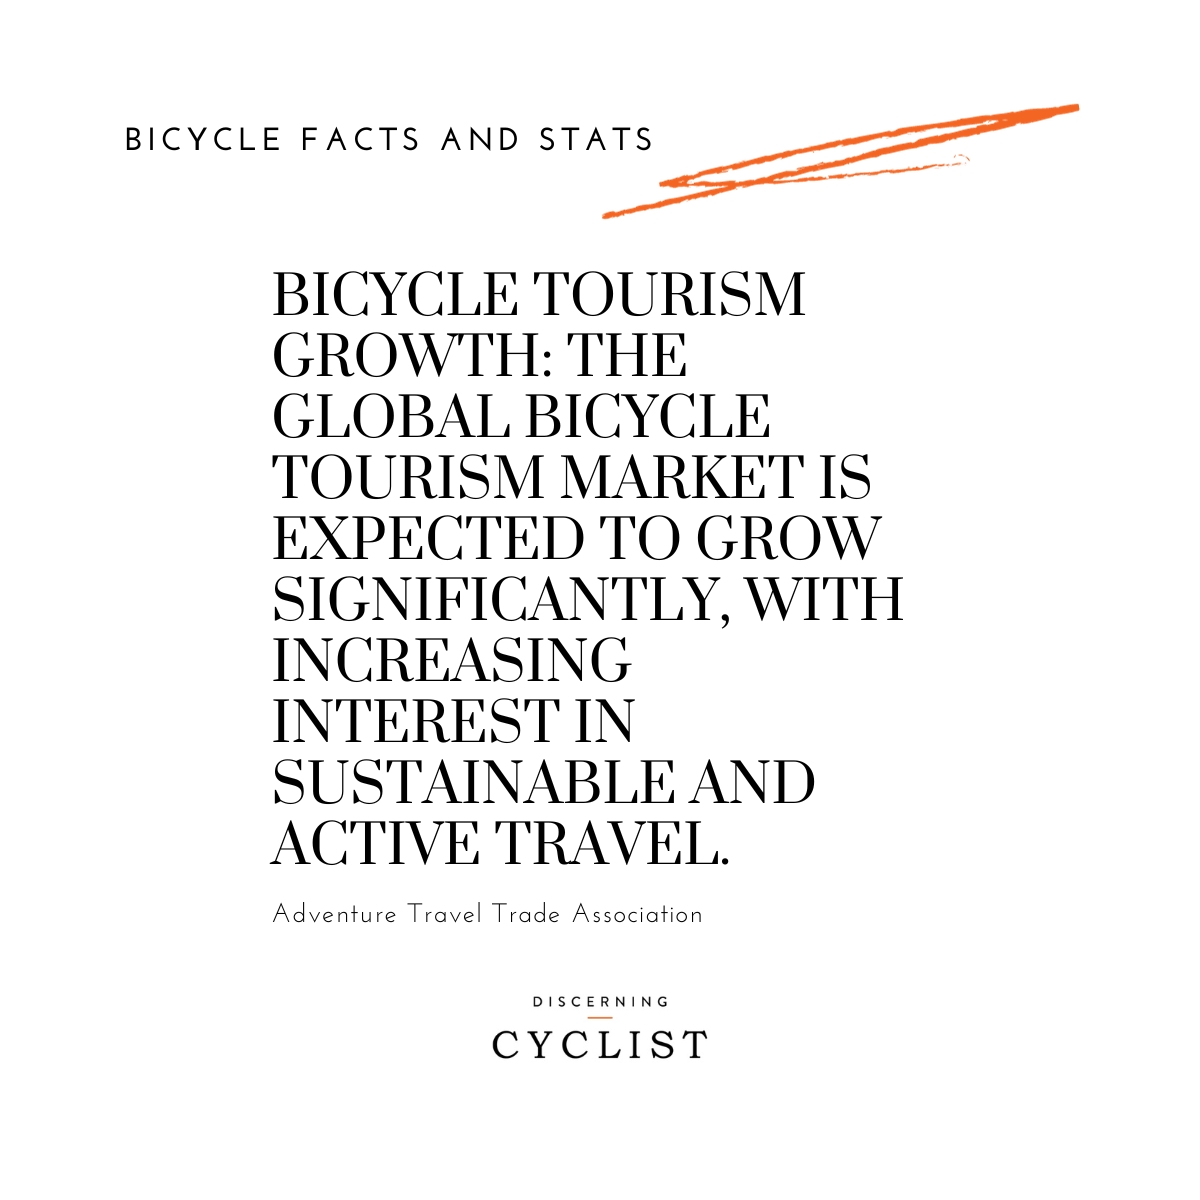 Bicycle Tourism Growth: The global bicycle tourism market is expected to grow significantly, with increasing interest in sustainable and active travel.